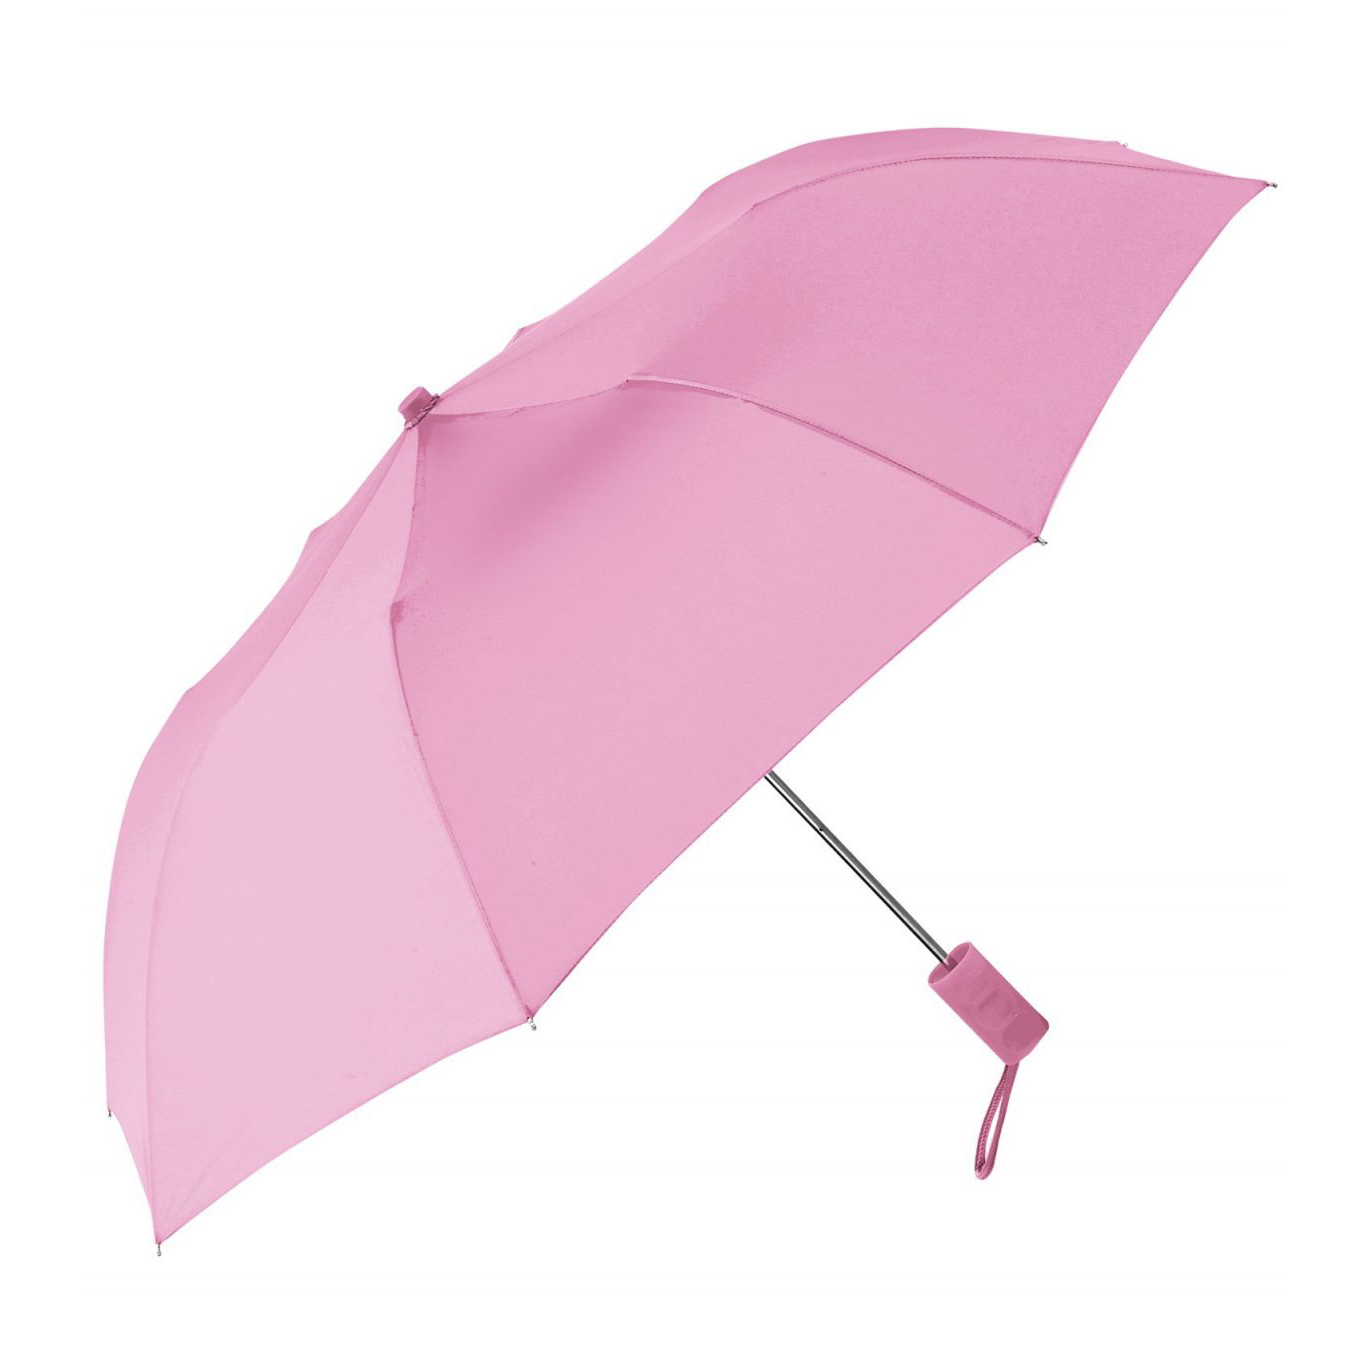 Compact 2351mm-pink